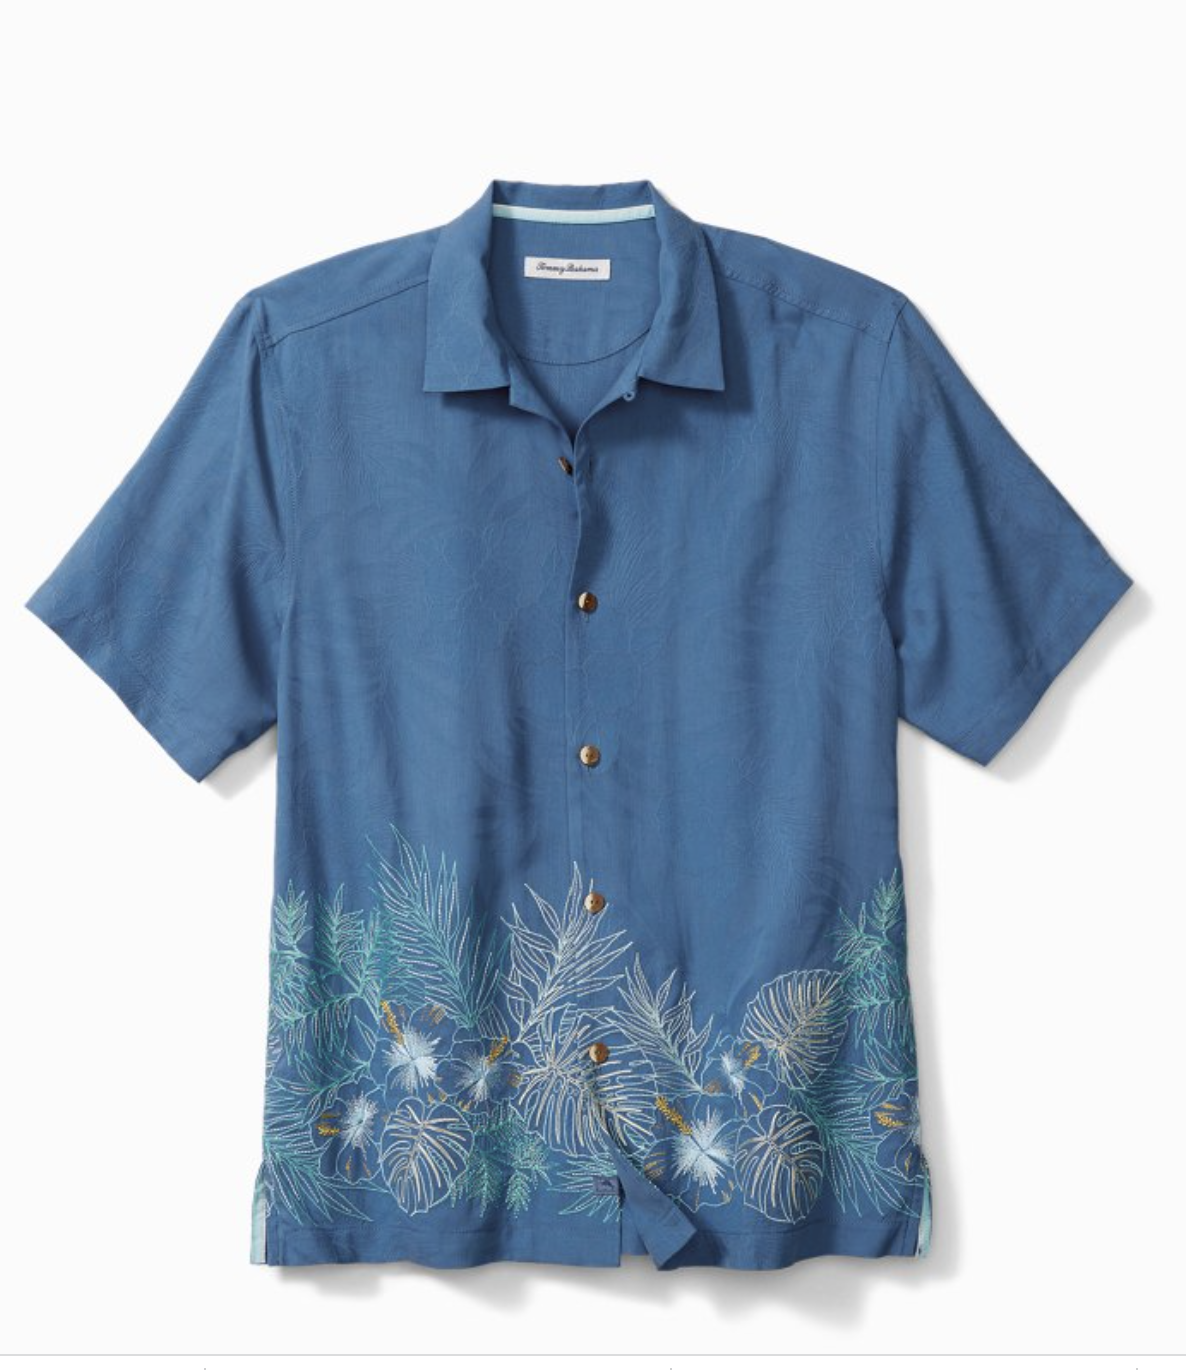 TOMMY BAHAMA Tommy Bahama M's Garden Bay Blooms